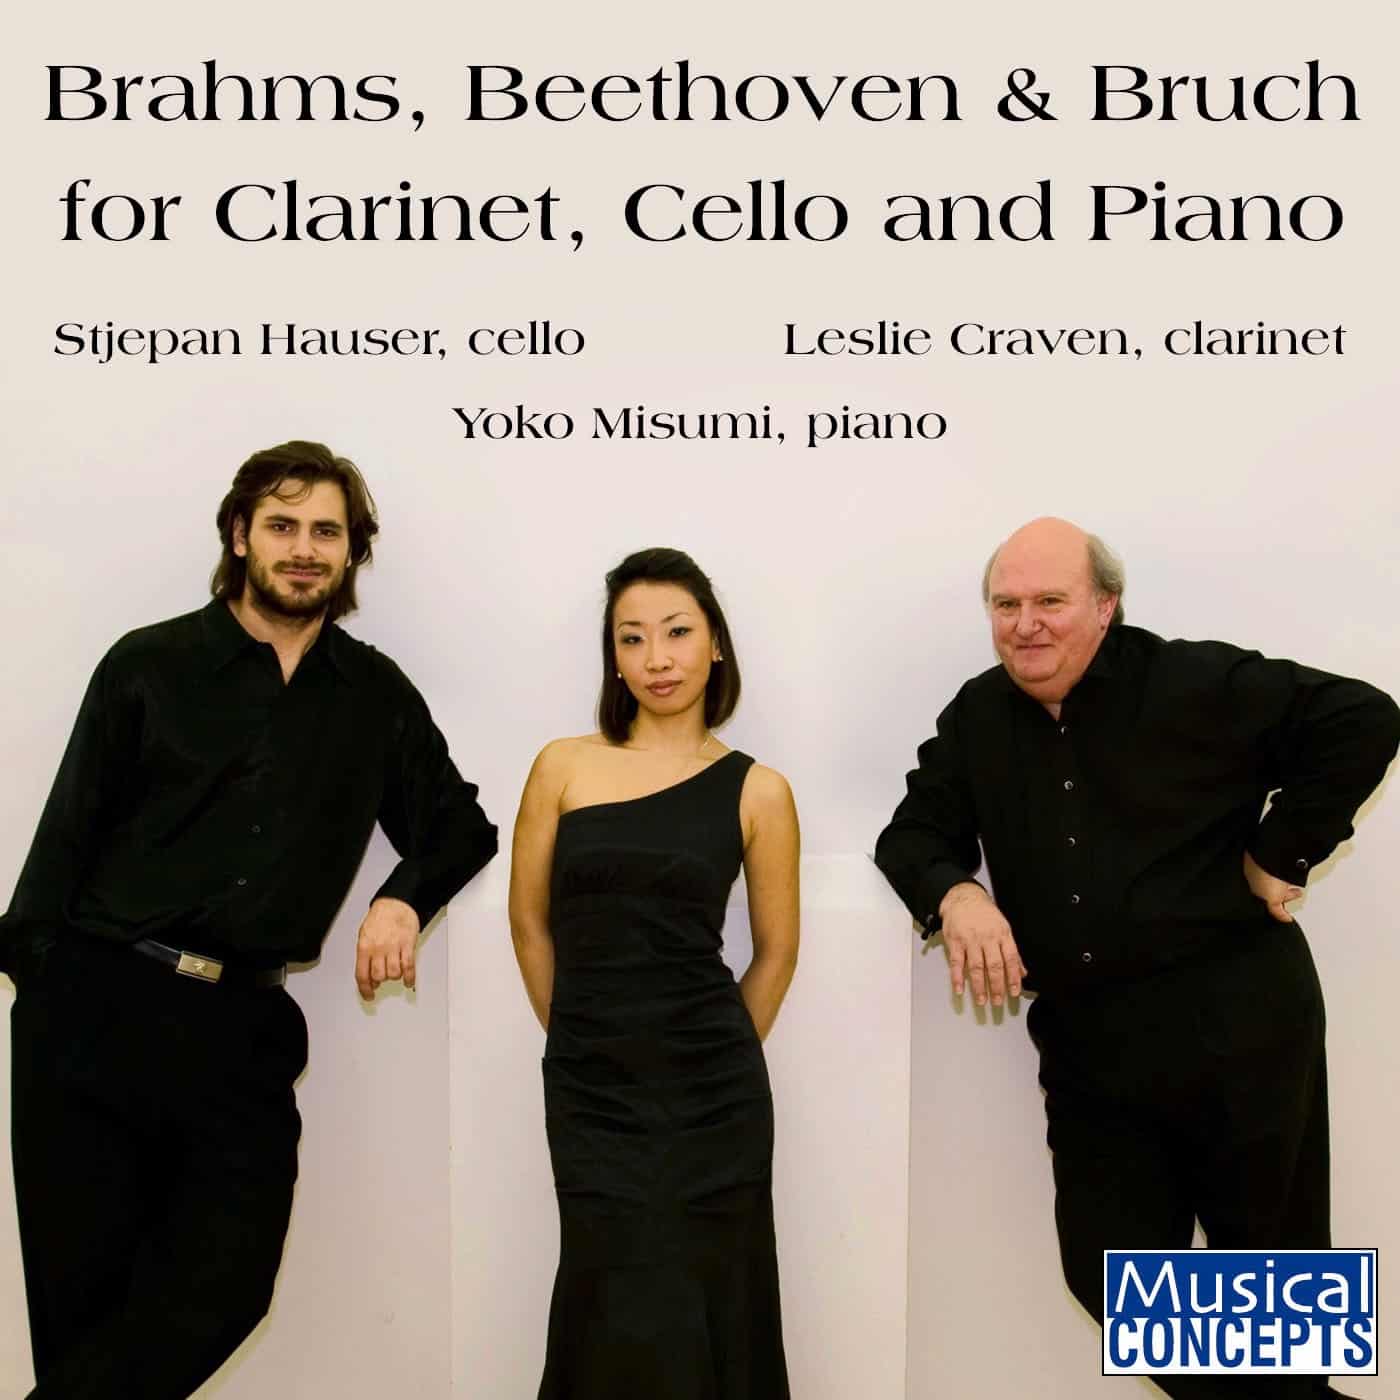 Brahms, Beethoven & Bruch for Clarinet, Cello & Piano